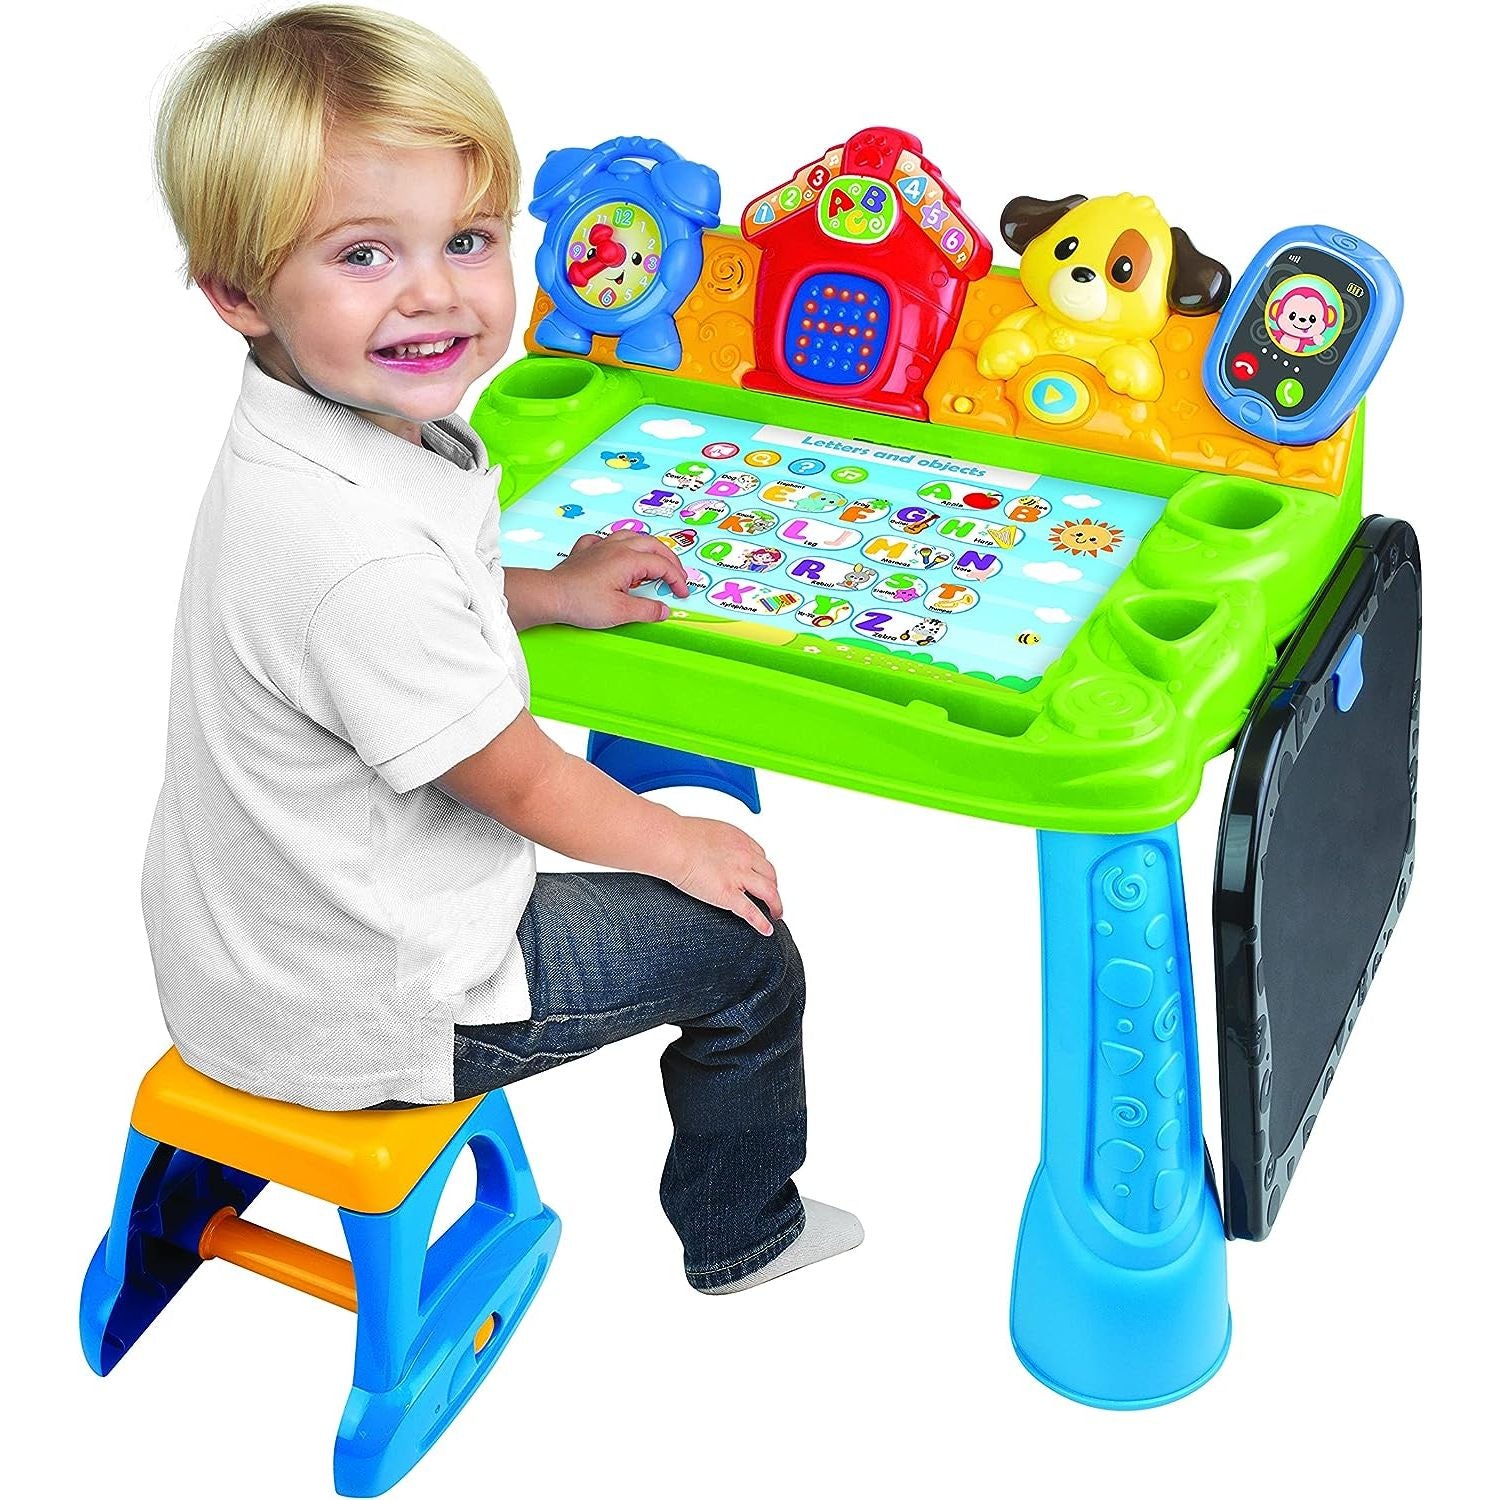 WinFun Smart Touch 'N Learn Activity Set